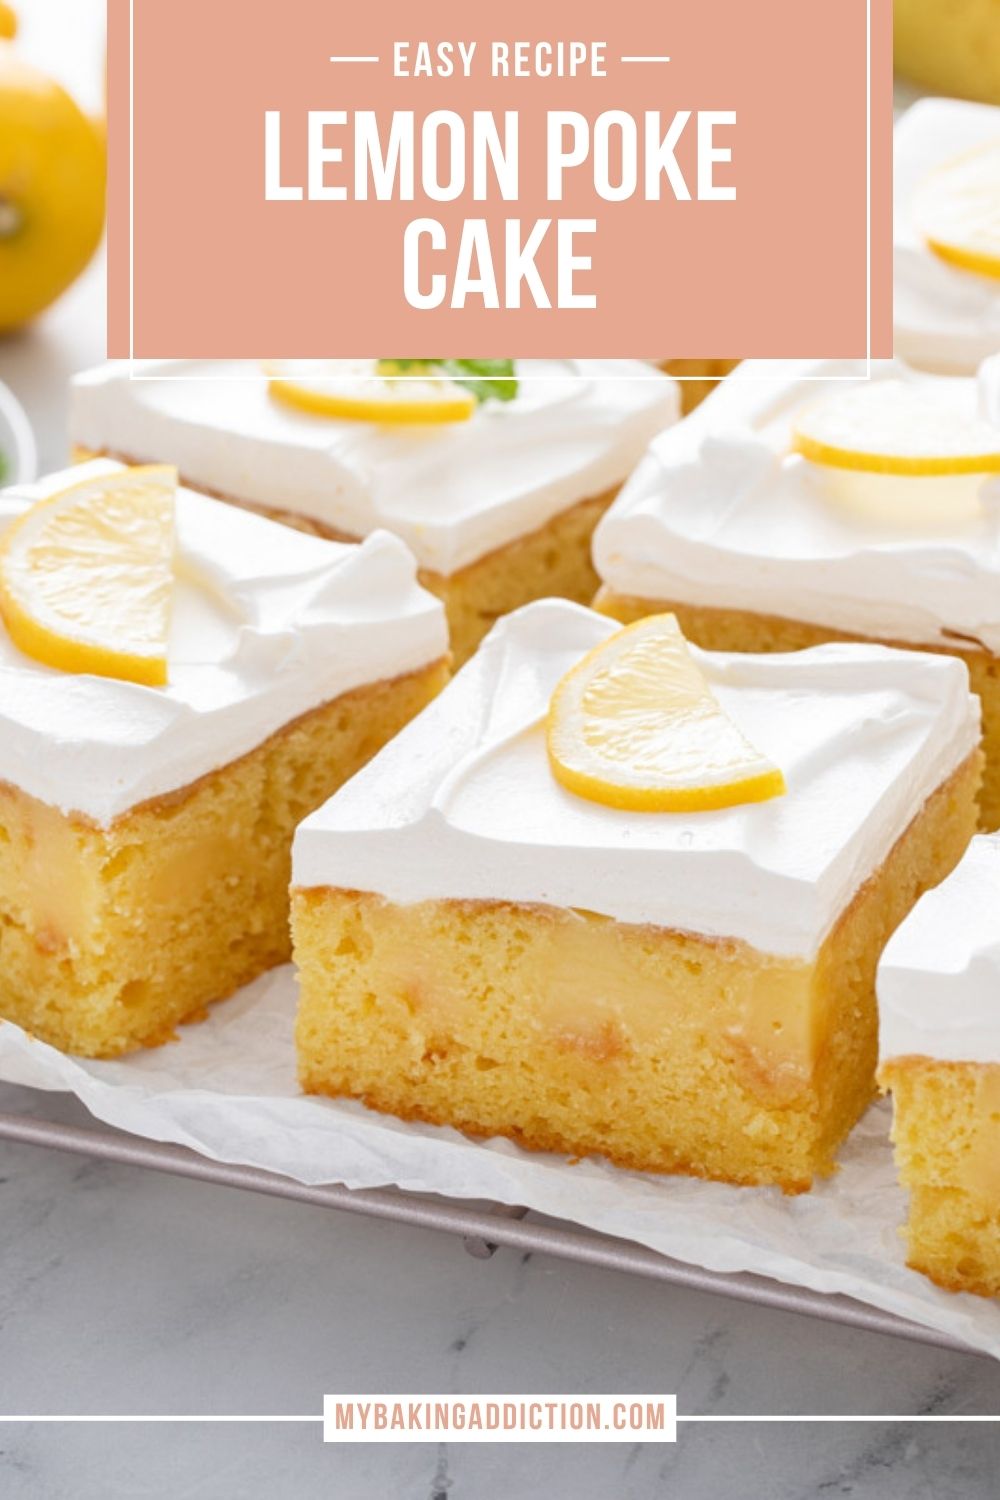 Sliced lemon poke cake on a piece of parchment paper. Text overlay includes recipe name.